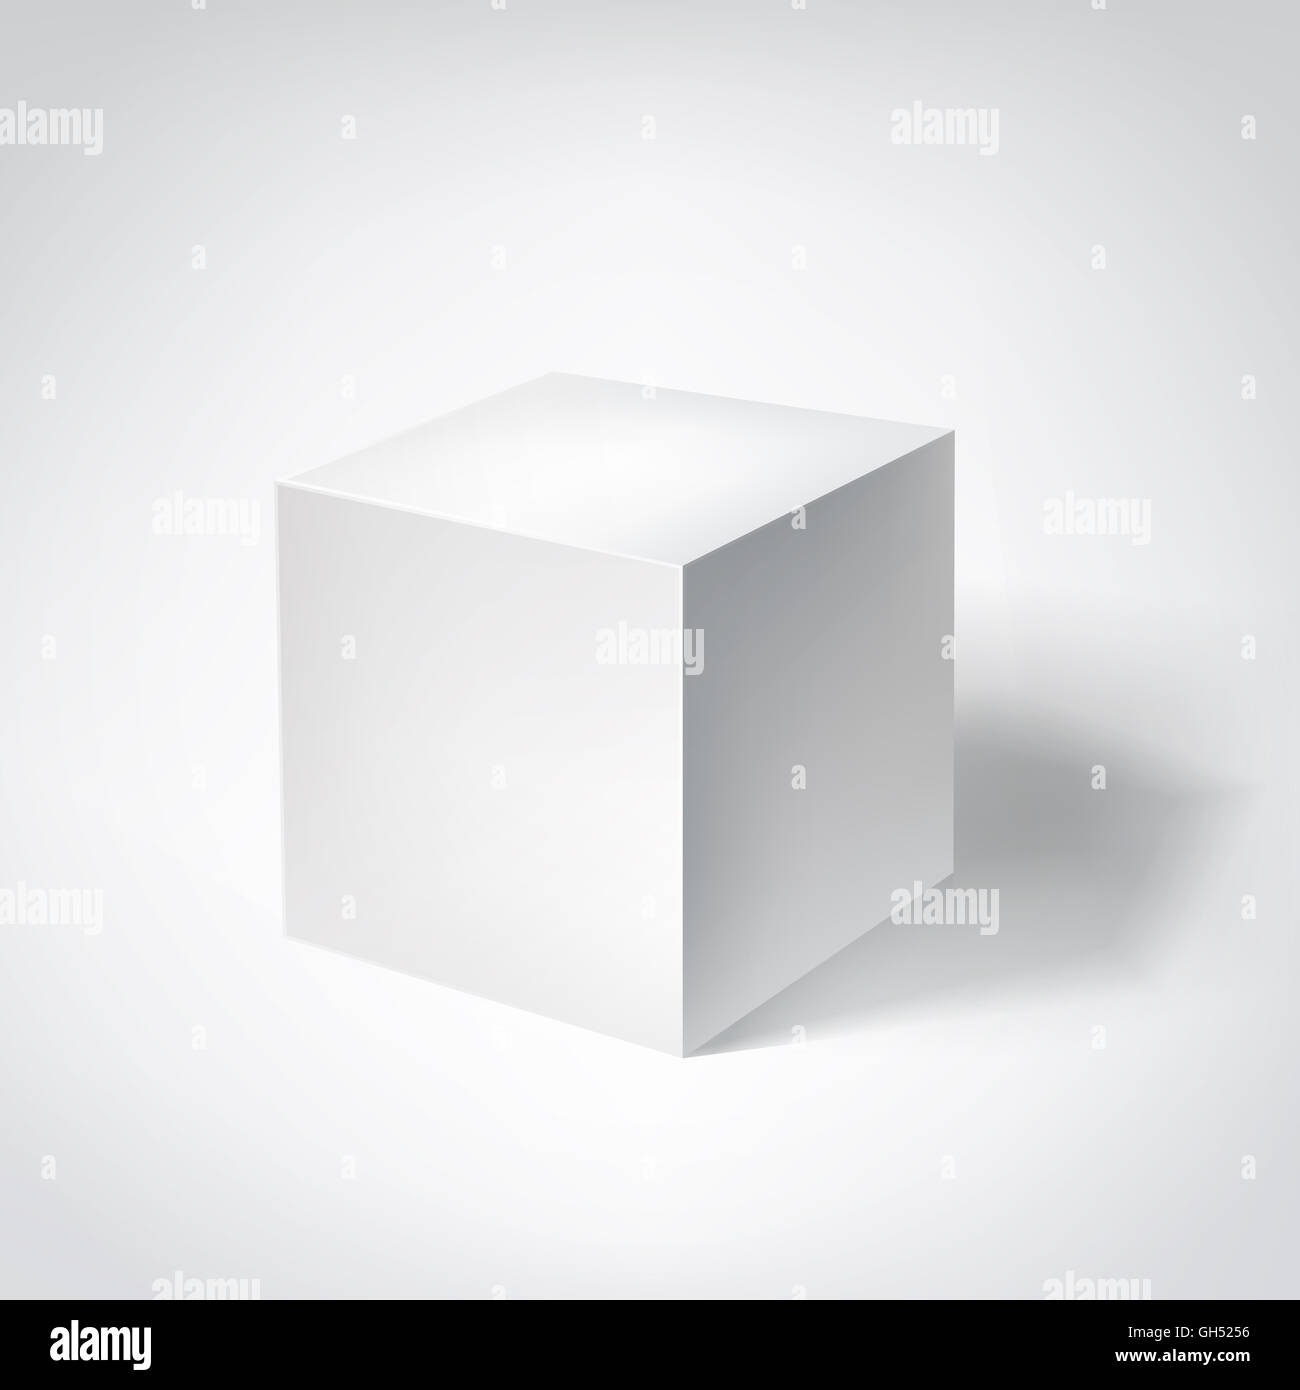 white 3d cube geometric figure with shadow Stock Photo